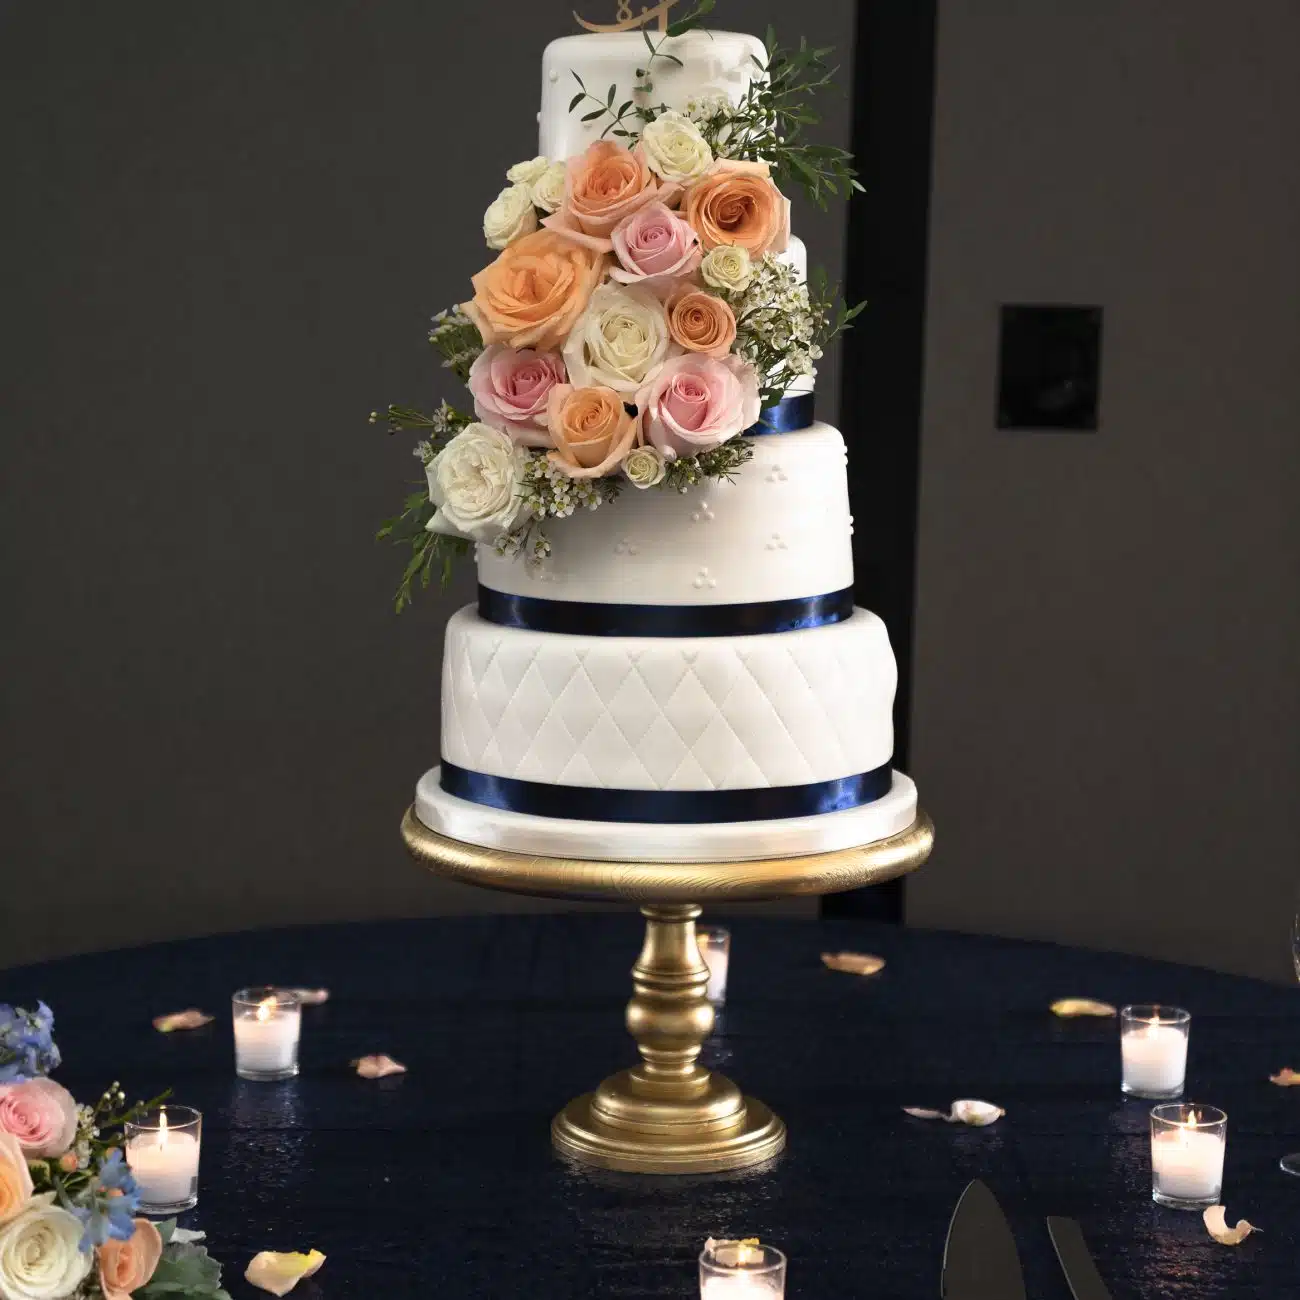 The wedding cake being placed in the convention center located in Greenville, NC